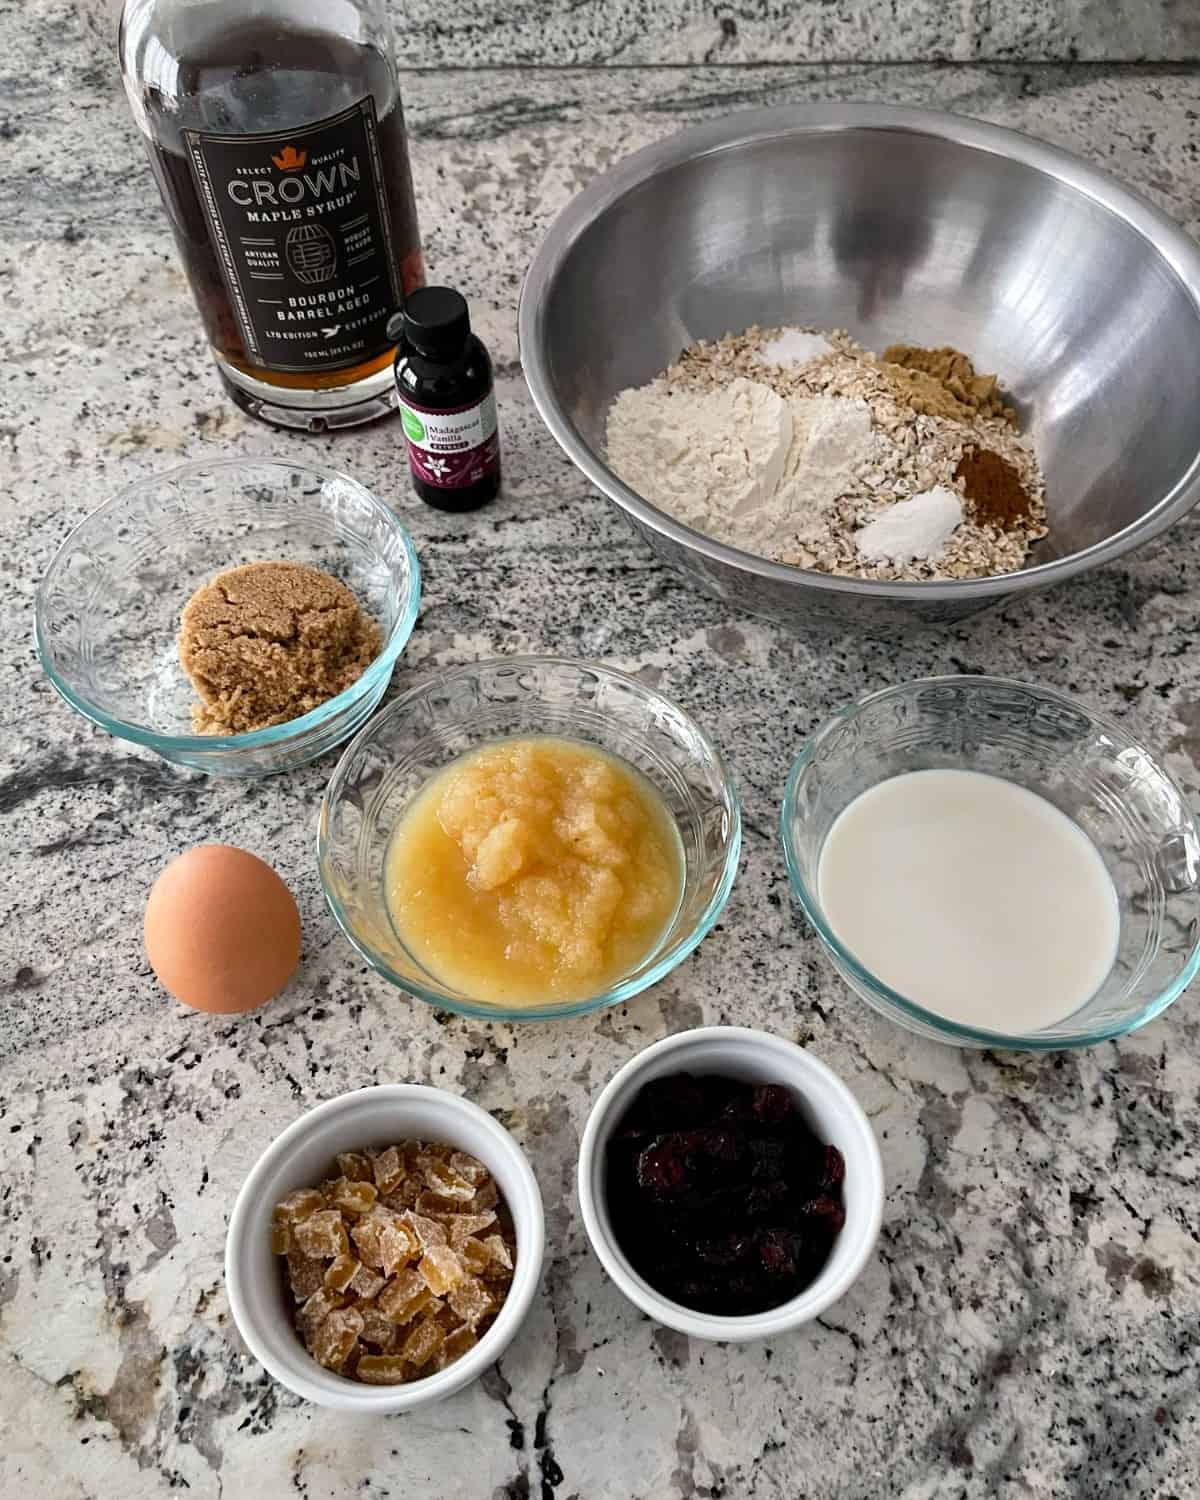 Ingredients including bourbon barrel aged pure maple syrup, vanilla extract, oats, flour, cinnamon, Truvia brown sugar blend, egg, applesauce, unsweetened almond milk, dried cranberries and chopped candied ginger.